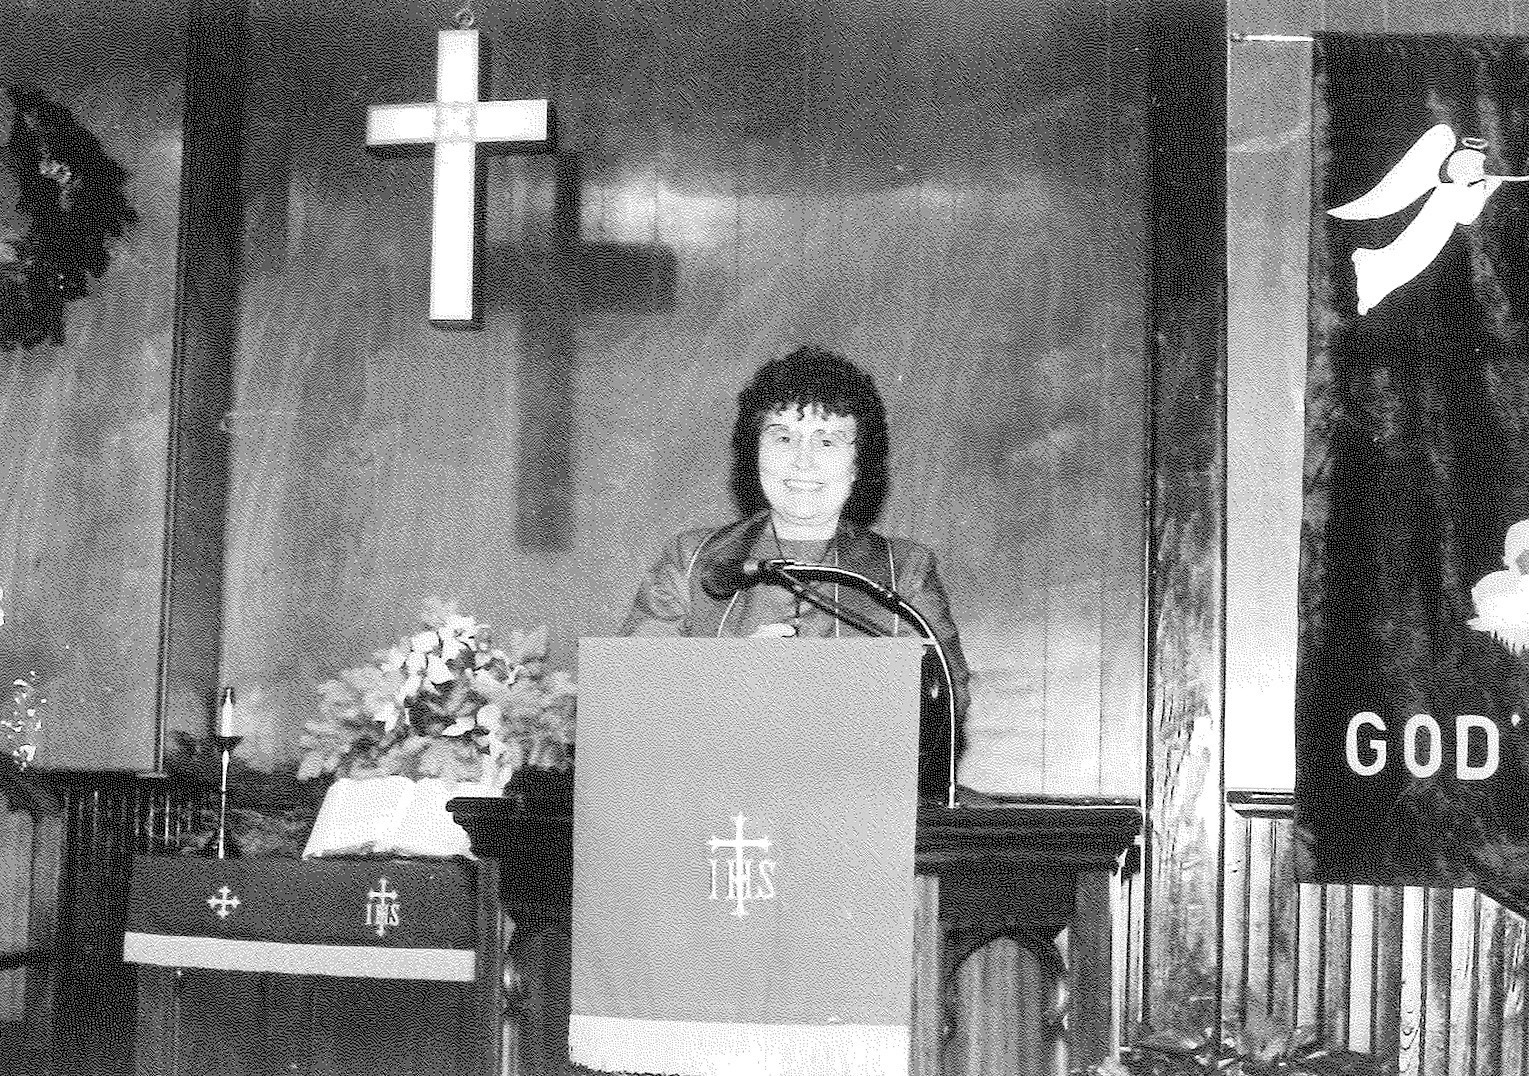 A 1994 ARTICLE written by Henry F. Desair featured Reverend Jane Ireland, the third female pastor to serve the Congregational Church in Stockton.